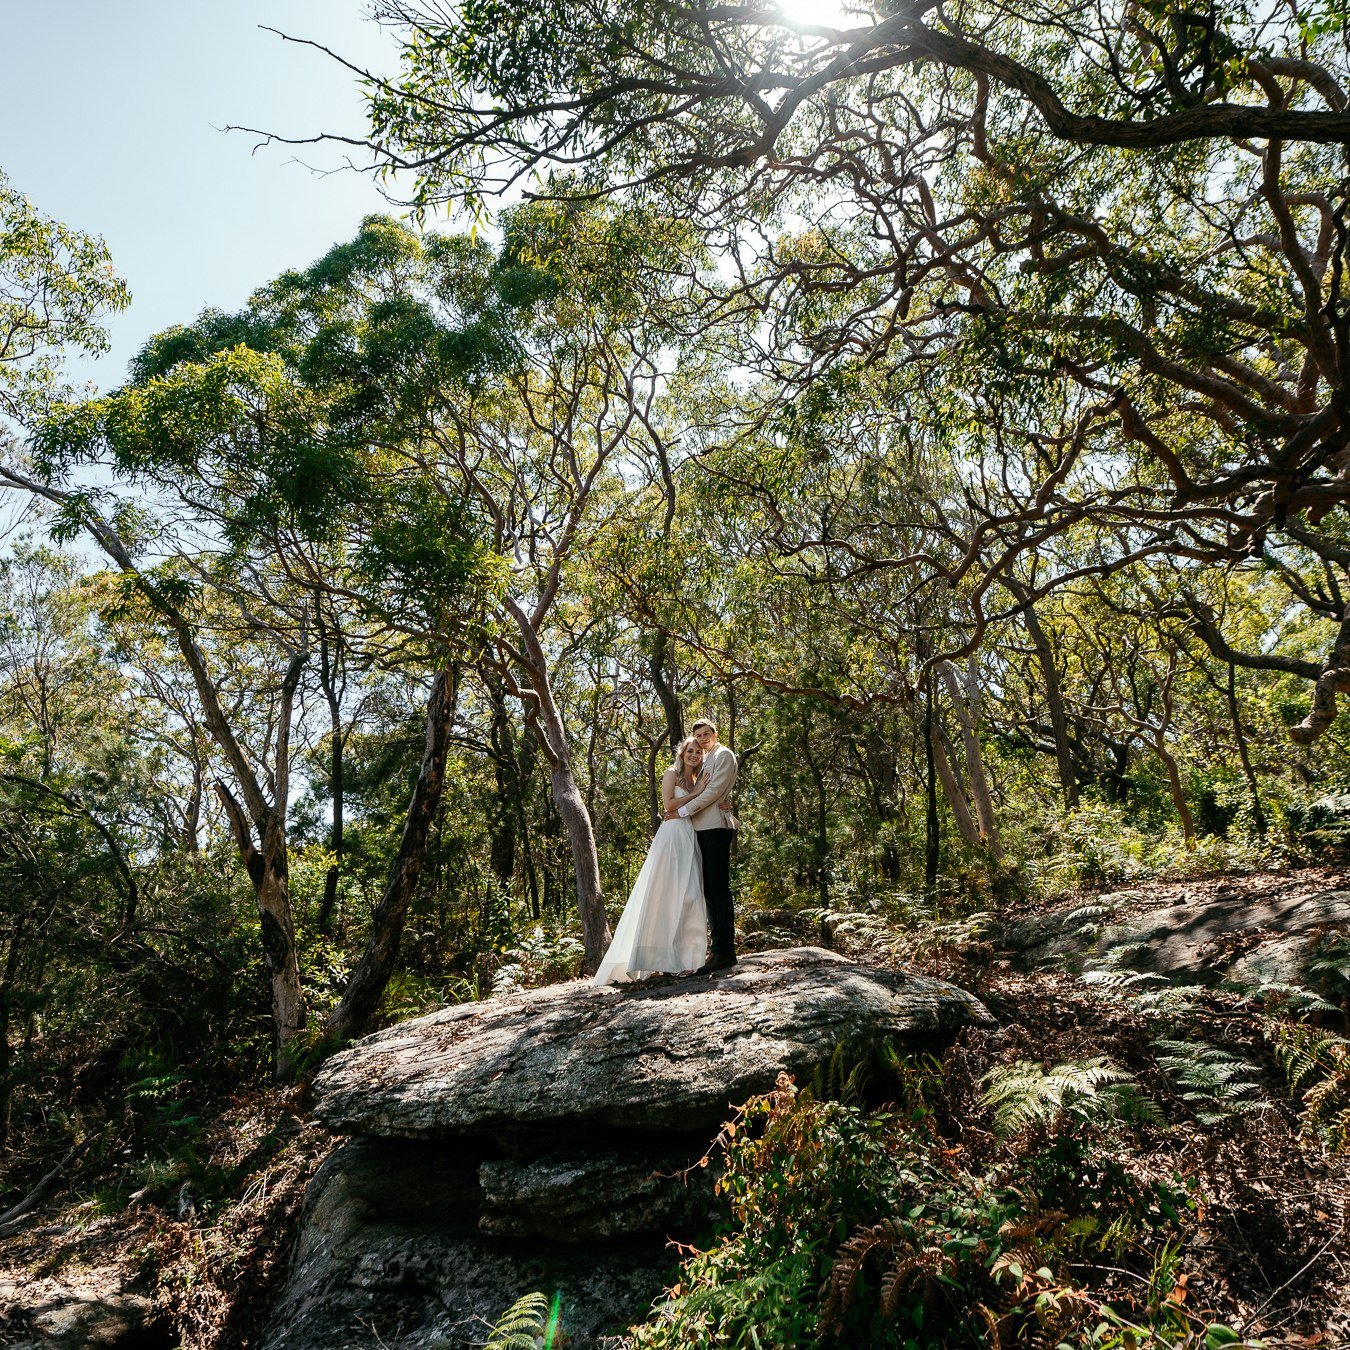 Natacha + Sean - intimate and beautiful wedding on the Northern Beaches of Sydney - Thanks guys for such a lovely and fun shoot 🙏

@sayidowithlou 
@pilgrimclothing 
@alyshamareemakeup 
@joeblackofficial 
 
#intimatewedding #IntimateWeddingPackage #m